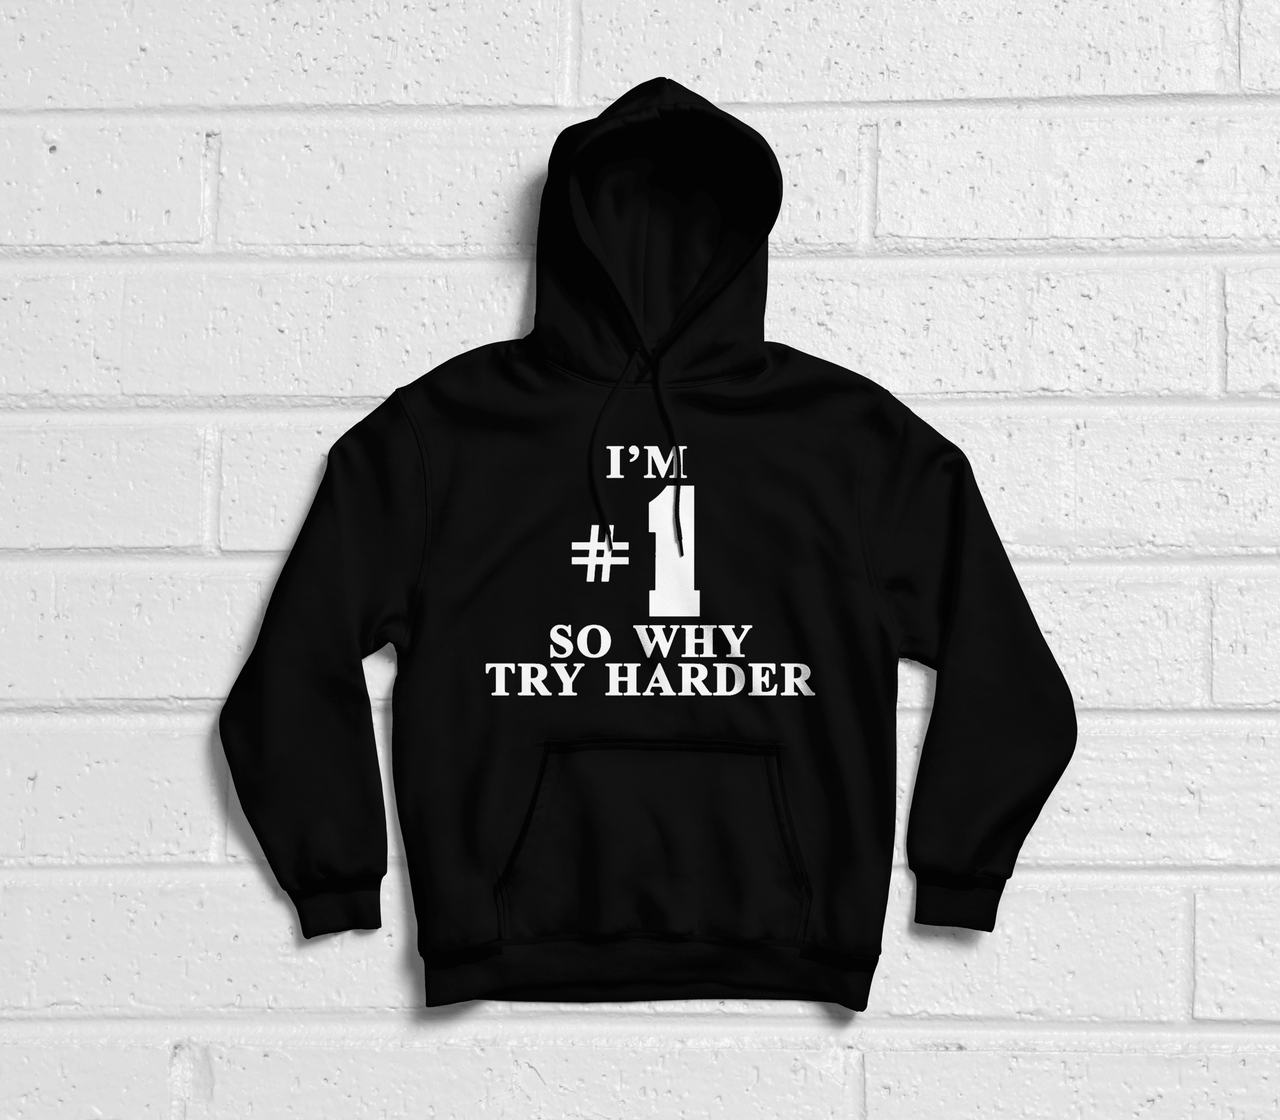 I'm Number 1 Unisex Hoodie, Inspired By Fat Boy Slim 8Ball